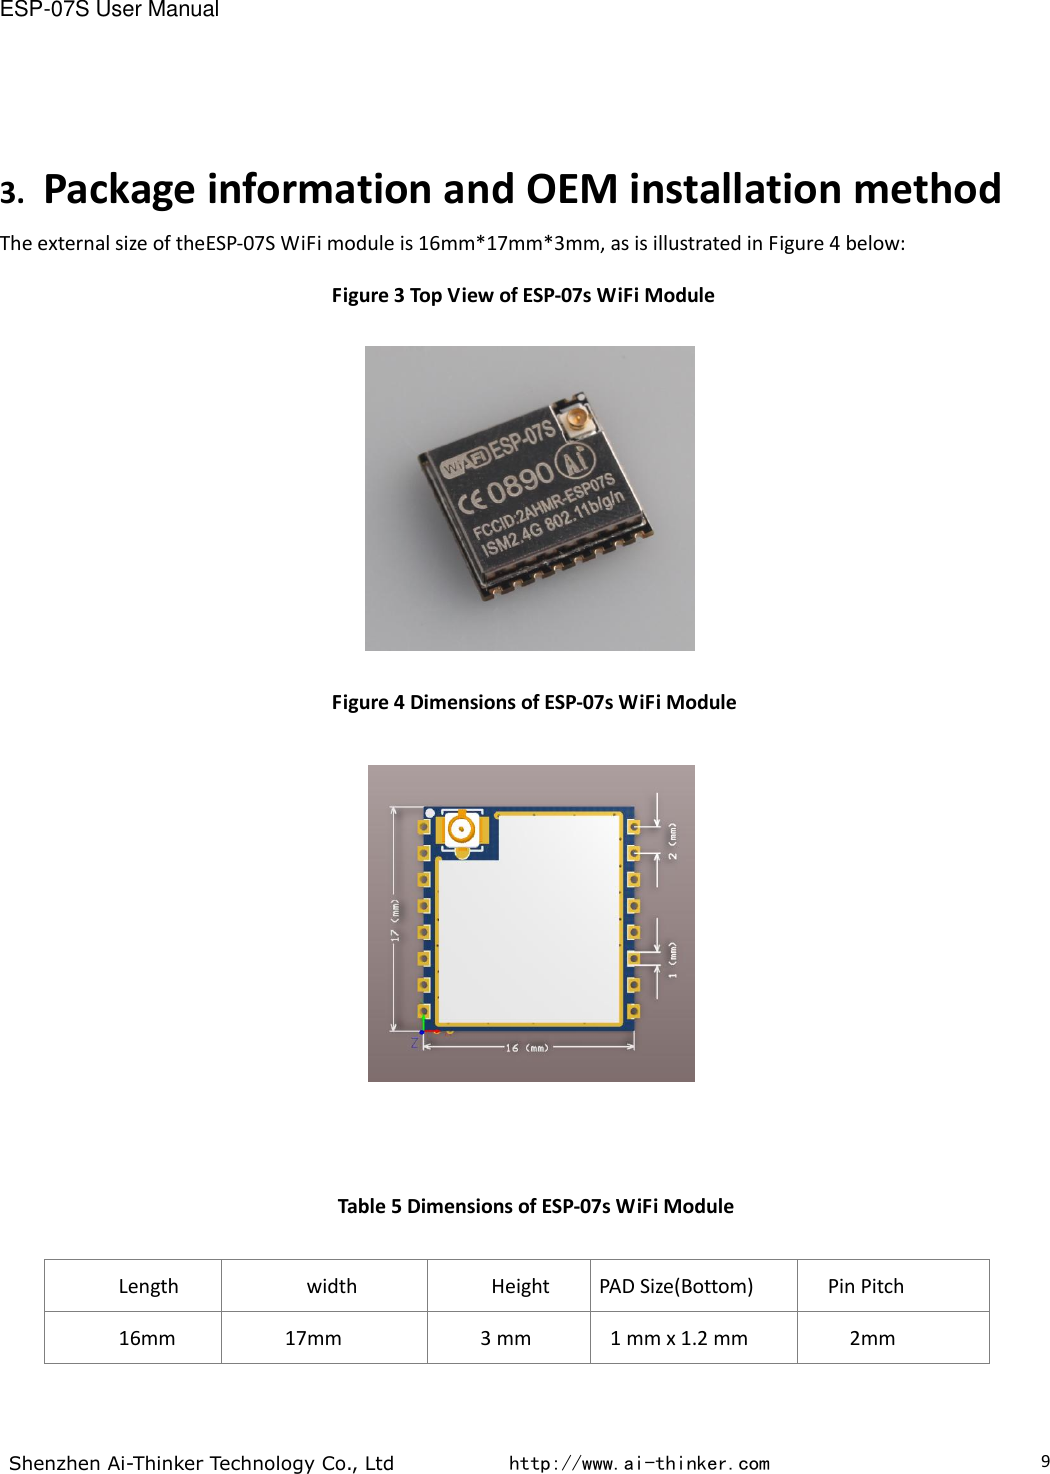 ESP-07S User Manual  Shenzhen Ai-Thinker Technology Co., Ltd           http://www.ai-thinker.com                                                                                     9 3. Package information and OEM installation method The external size of theESP-07S WiFi module is 16mm*17mm*3mm, as is illustrated in Figure 4 below: Figure 3 Top View of ESP-07s WiFi Module  Figure 4 Dimensions of ESP-07s WiFi Module     Table 5 Dimensions of ESP-07s WiFi Module  Length width Height PAD Size(Bottom) Pin Pitch 16mm 17mm 3 mm 1 mm x 1.2 mm 2mm  